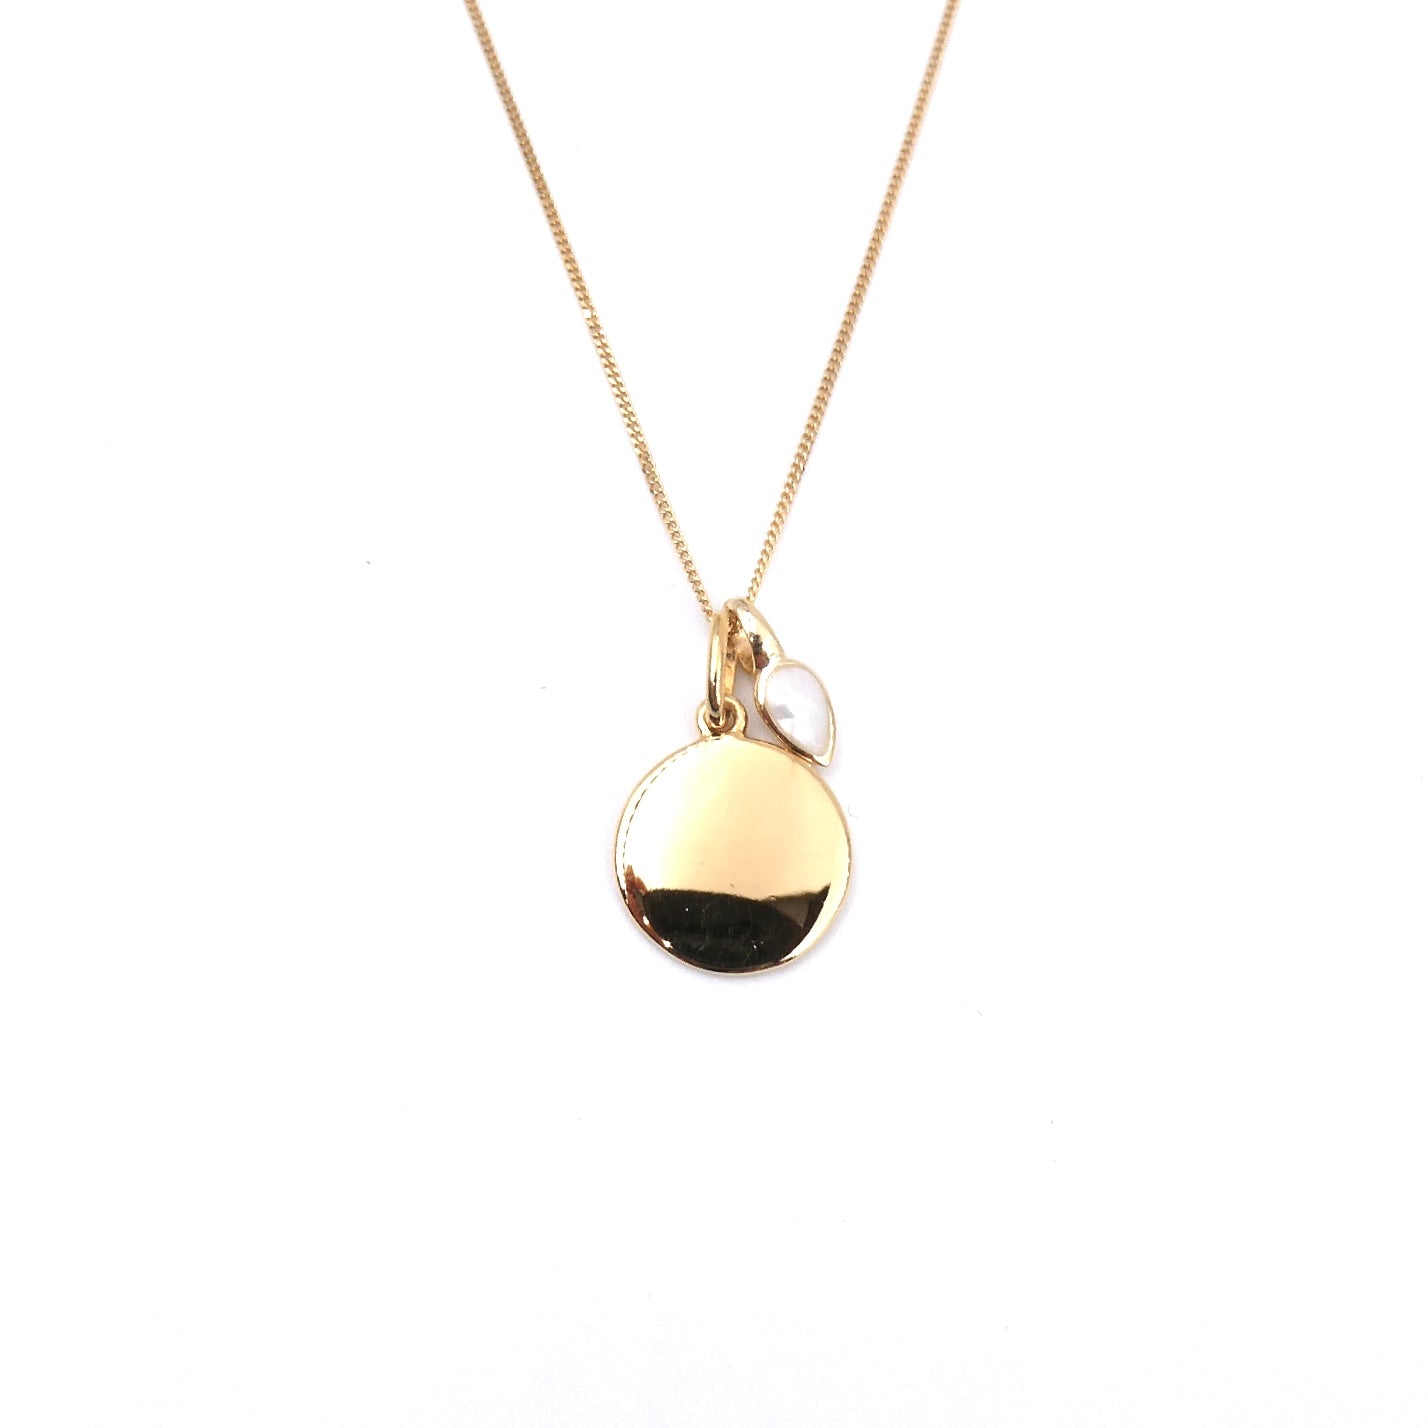 Gold plated pendant with a pearl drop on a fine chain, pearl for June. - Collected